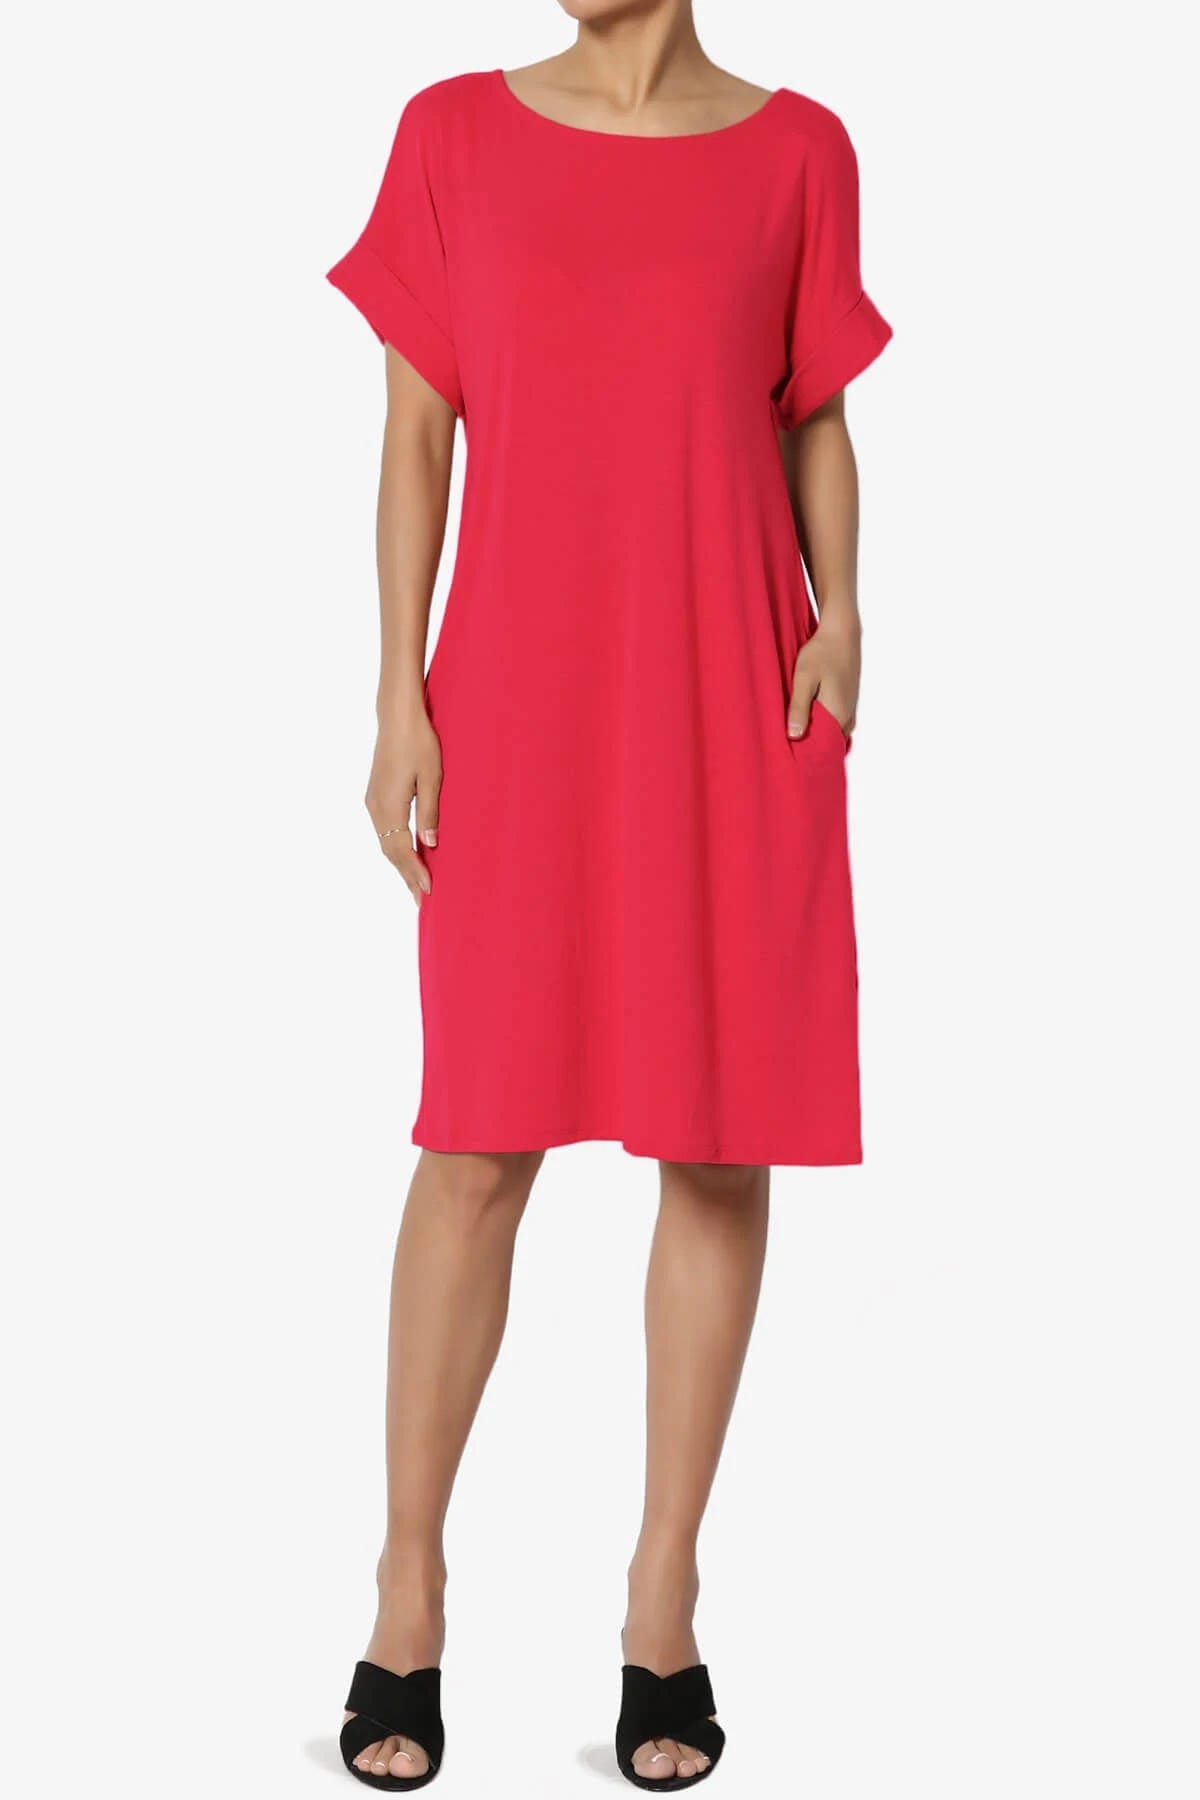 Comfortable Women's PLUS Jersey T-Shirt Dress in Red | Image